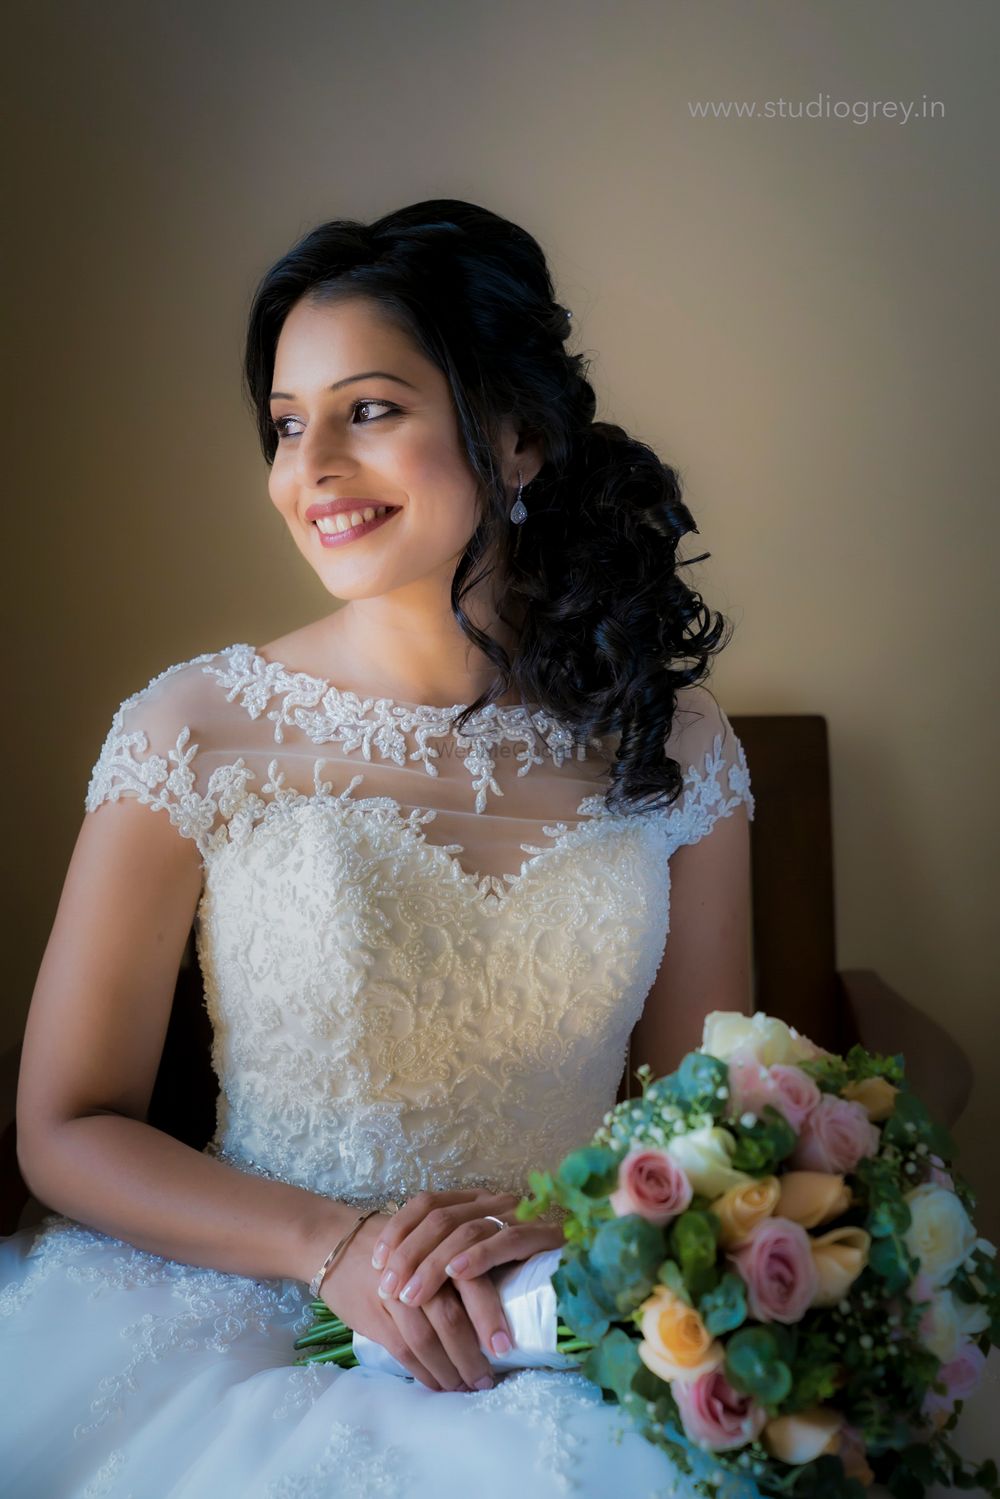 Photo of Bride posing in a beautiful white gown on her wedding day